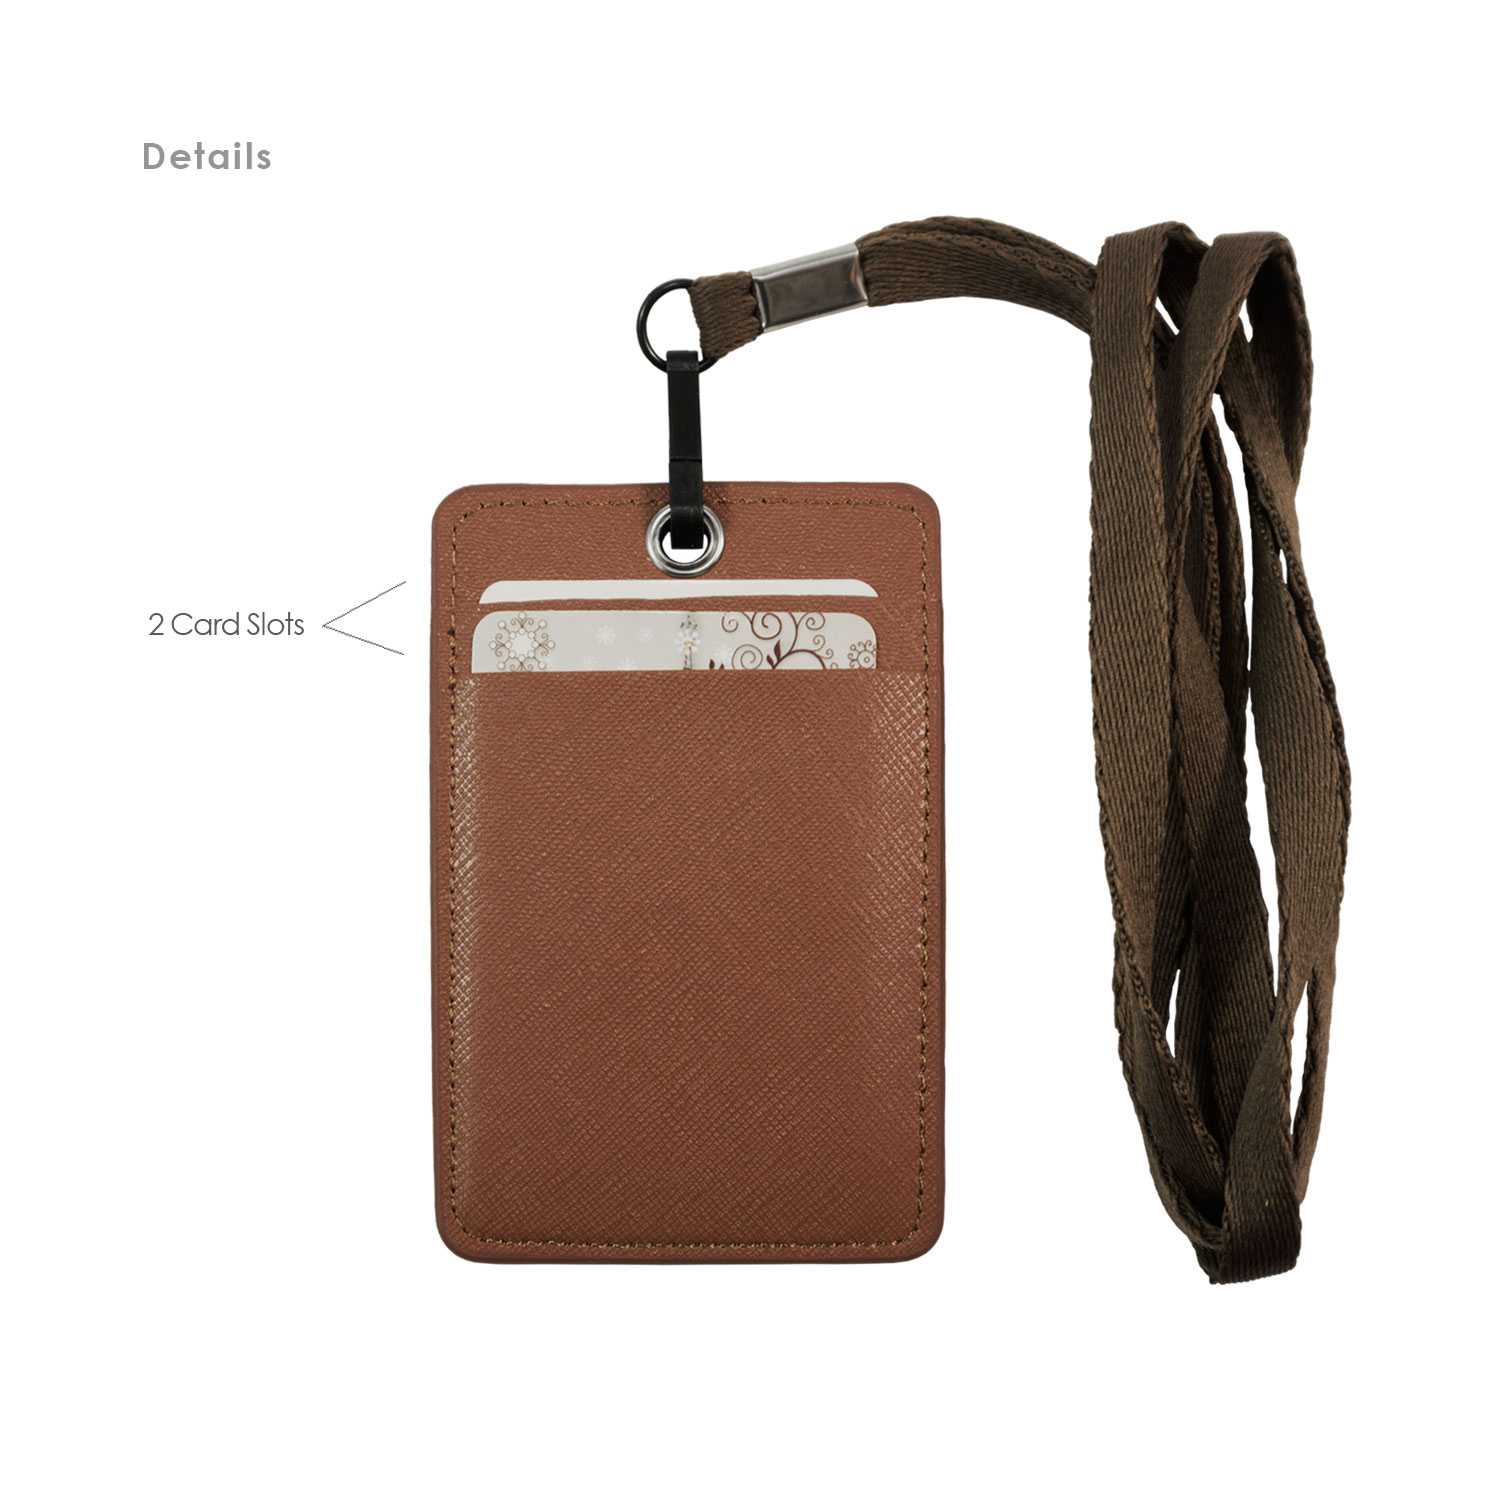 Unisex ID & Credit Cards Holder Wallet with Lanyard - Brown - Zestique